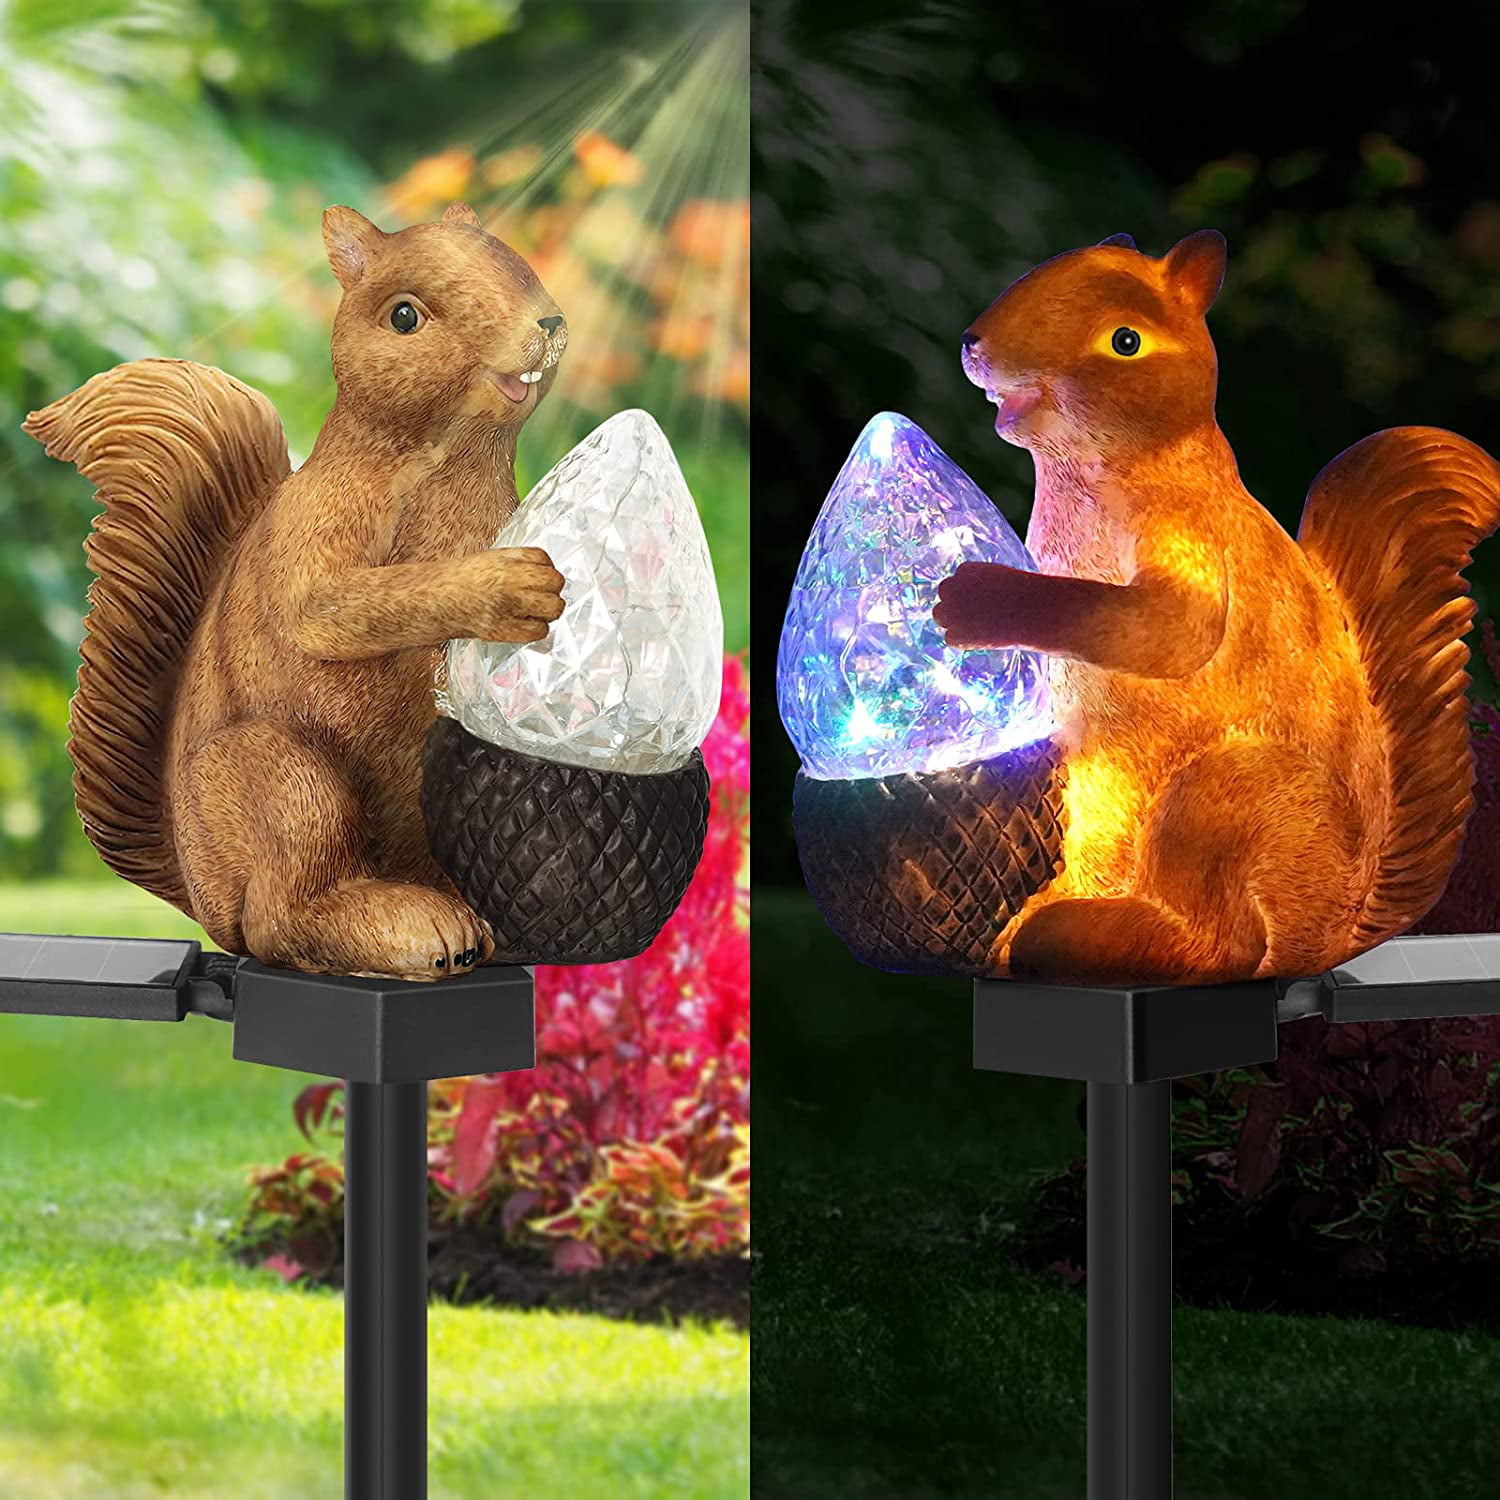 Details about   SQUIRREL NUT TREE ANIMAL OUTDOOR 9" STATUE LANTERN LED PATH SOLAR LIGHT LAMP 